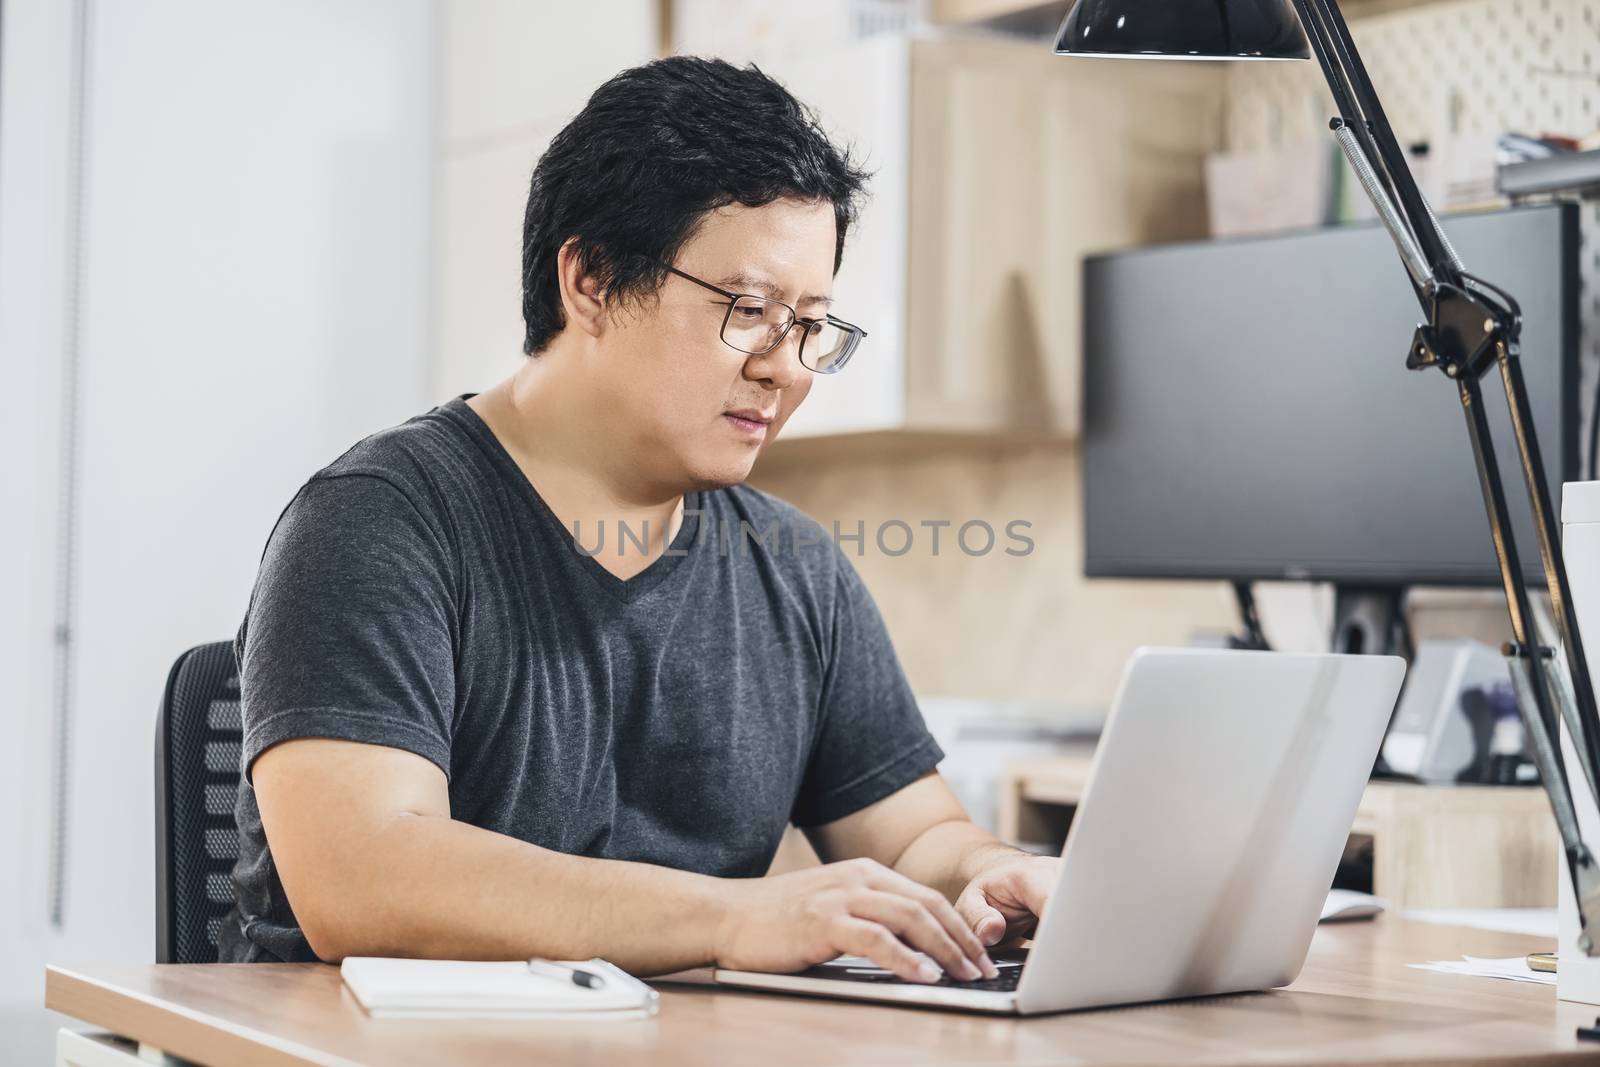 Asian business man using technology laptop for working from home in indoor bedroom of house by video conference call, startups and business owner,lifestyle occupation,social distancing concept